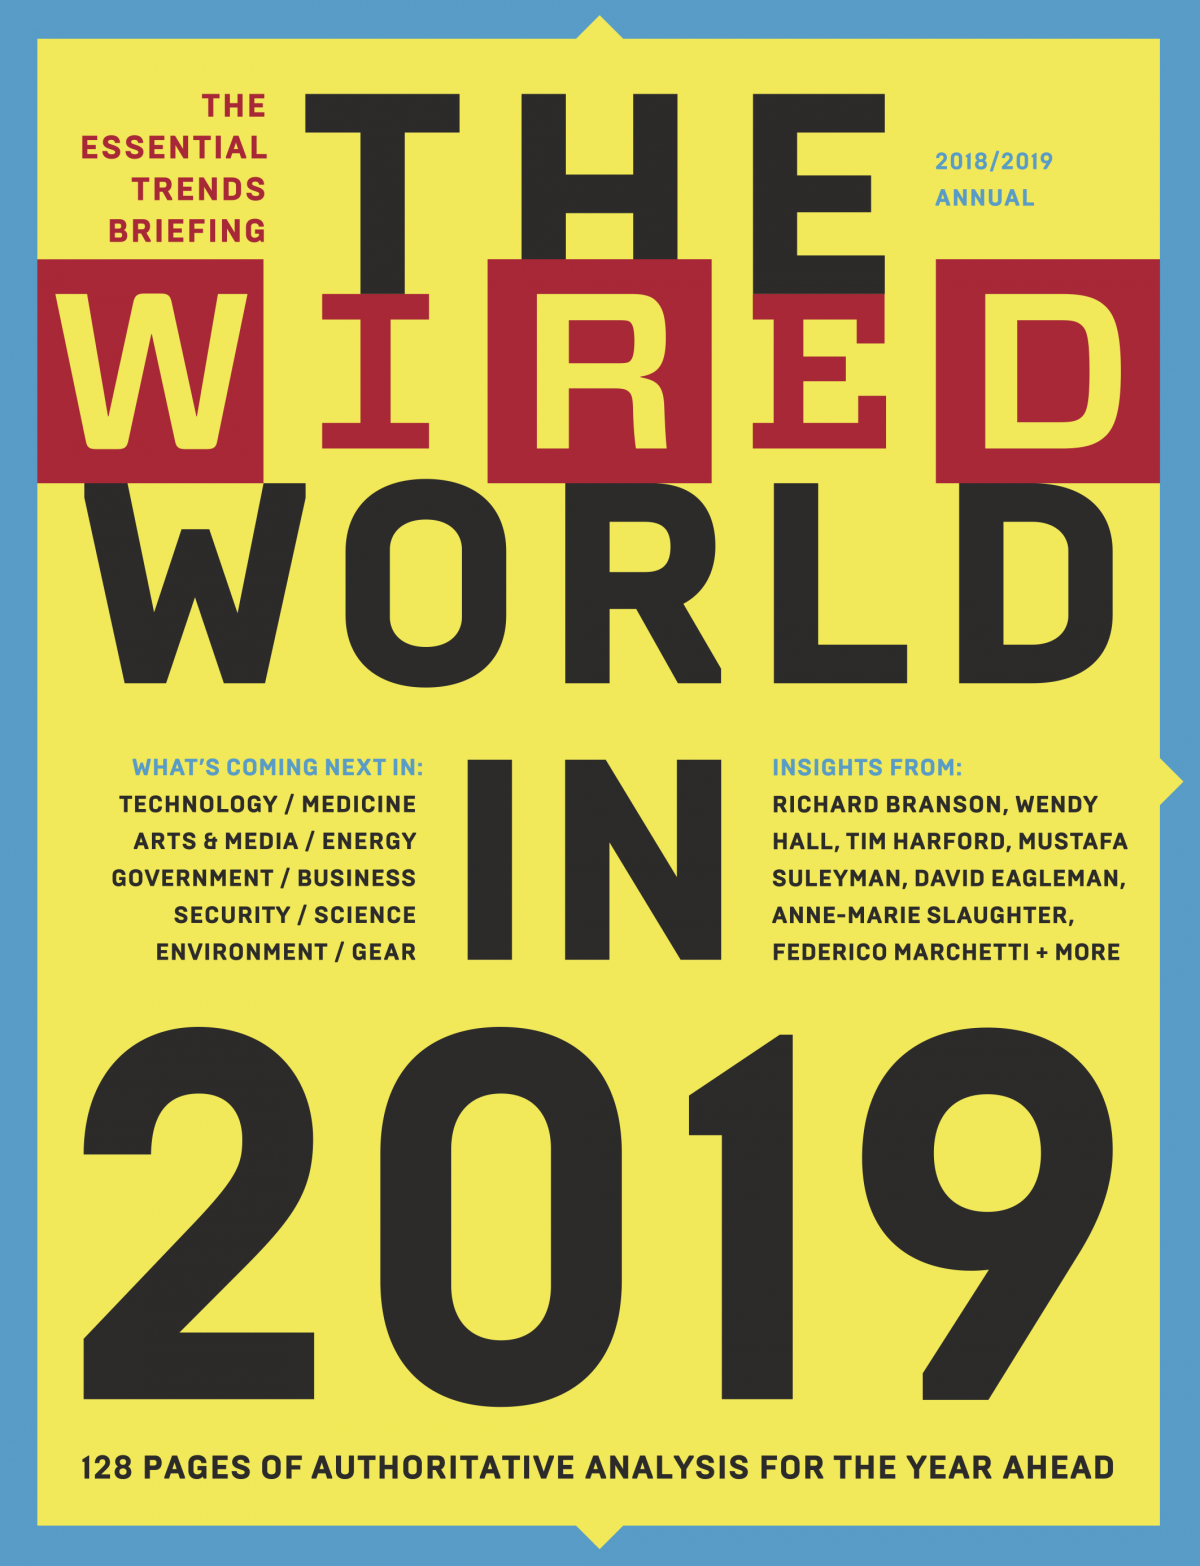 Cover of The Wired World in 2019, including bylines for Richard Branson, Wendy Hall, Tim Harford Mustafa Suleyman, David Eagleman, Anne-Marie Slaughter and Federicao Marchetti